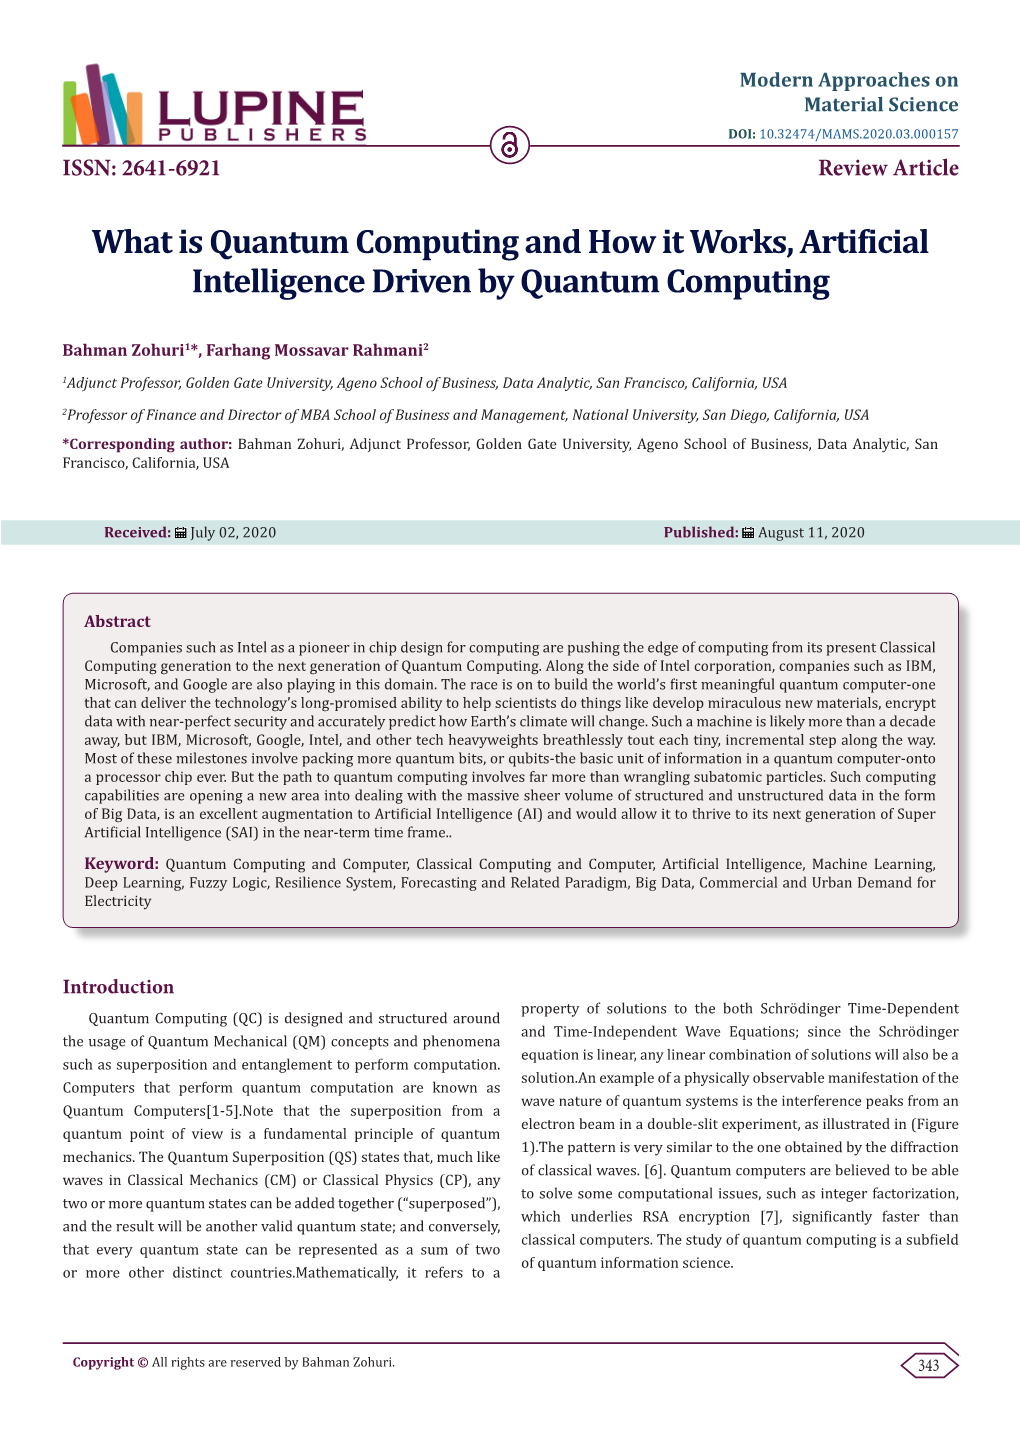 What Is Quantum Computing and How It Works, Artificial Intelligence Driven by Quantum Computing